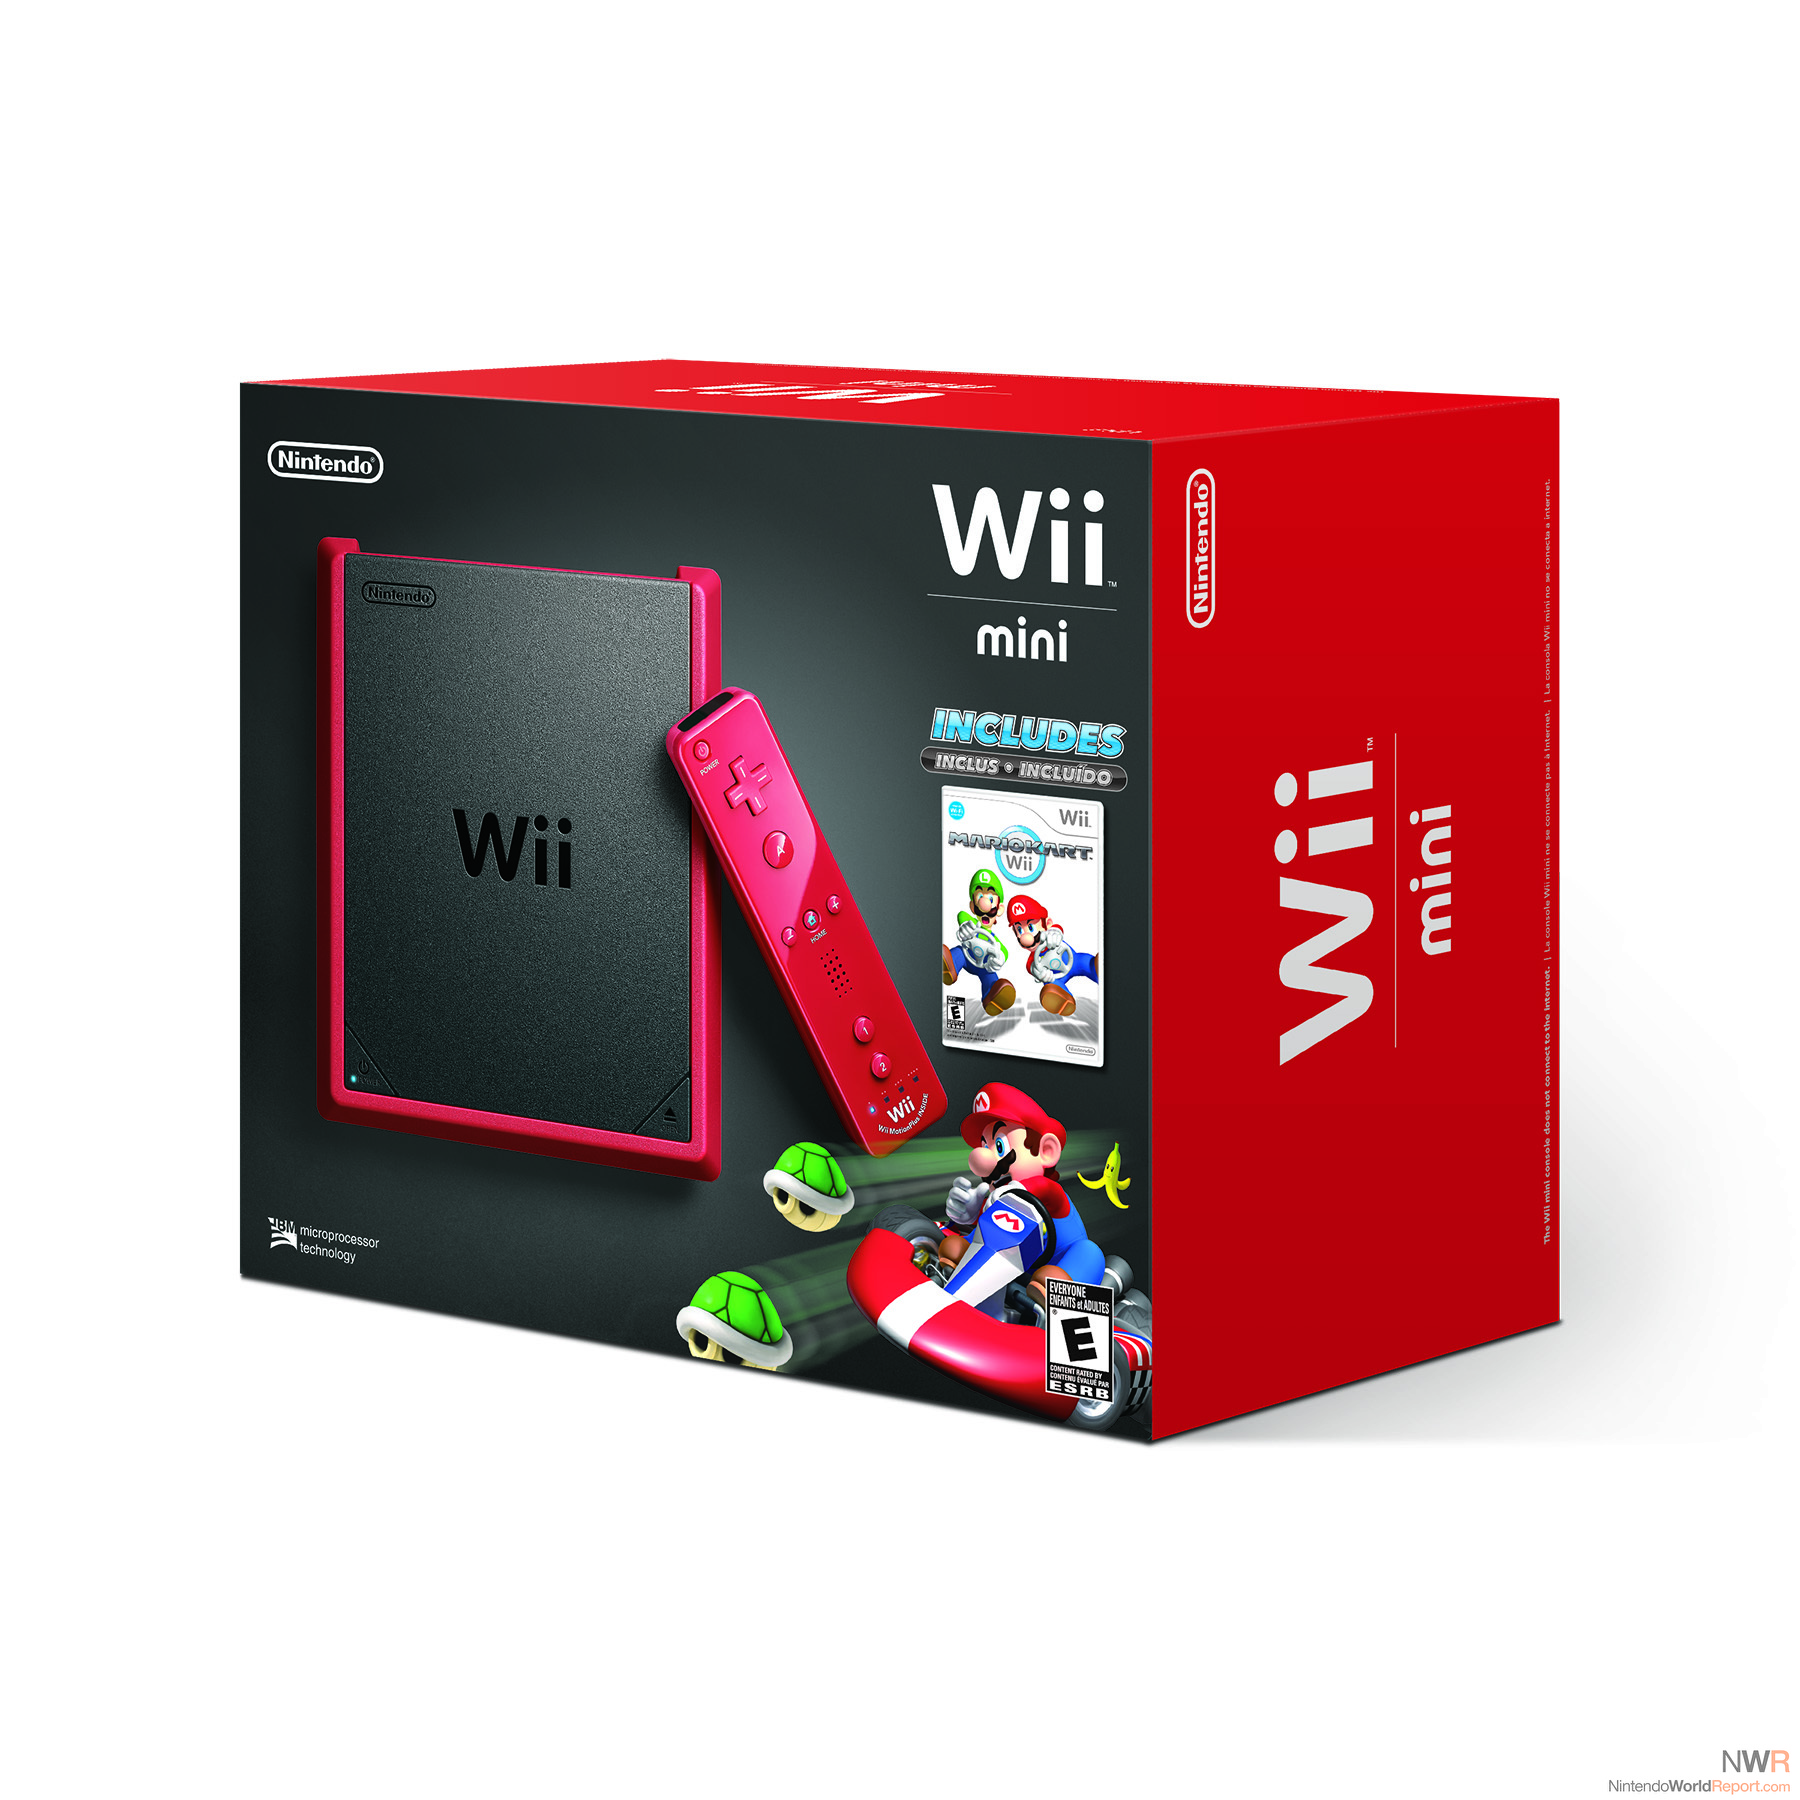 Wii Mini Coming to United States, Bundled with Mario Kart Wii - News -  Nintendo World Report